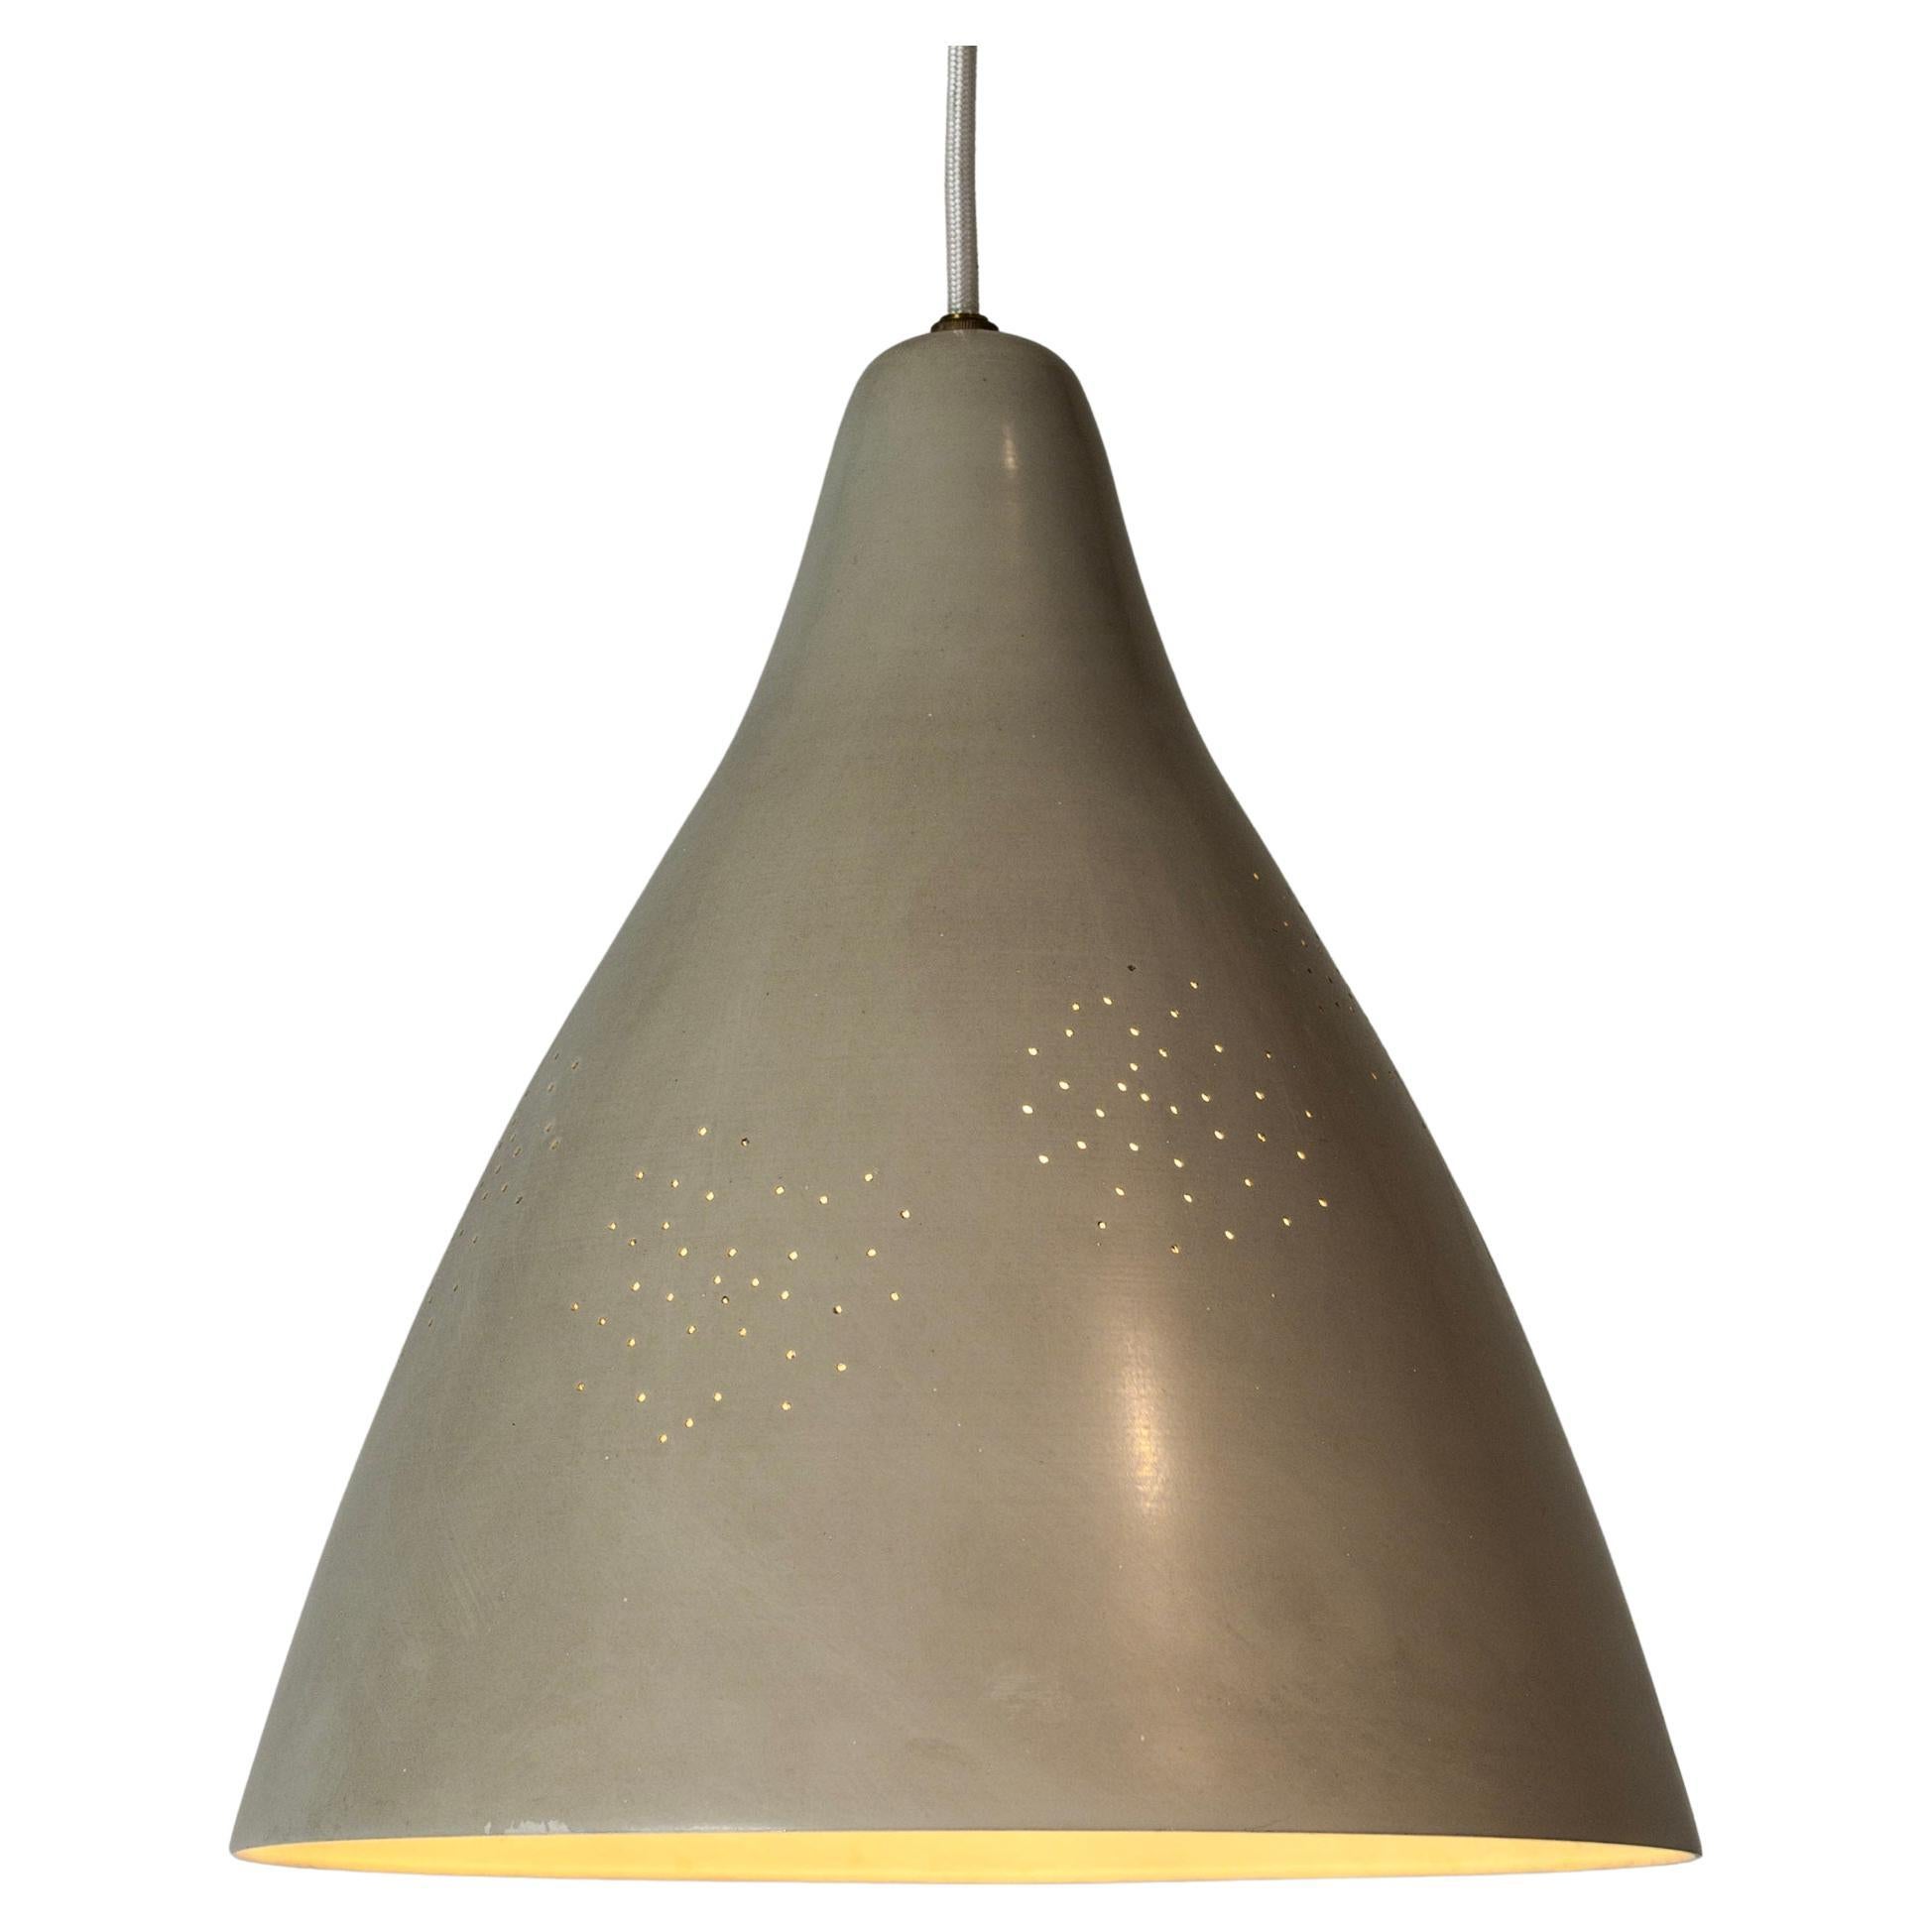 Midcentury Metal Pendant Lamp by Lisa Johansson-Pape, Orno, Finland, 1950s For Sale